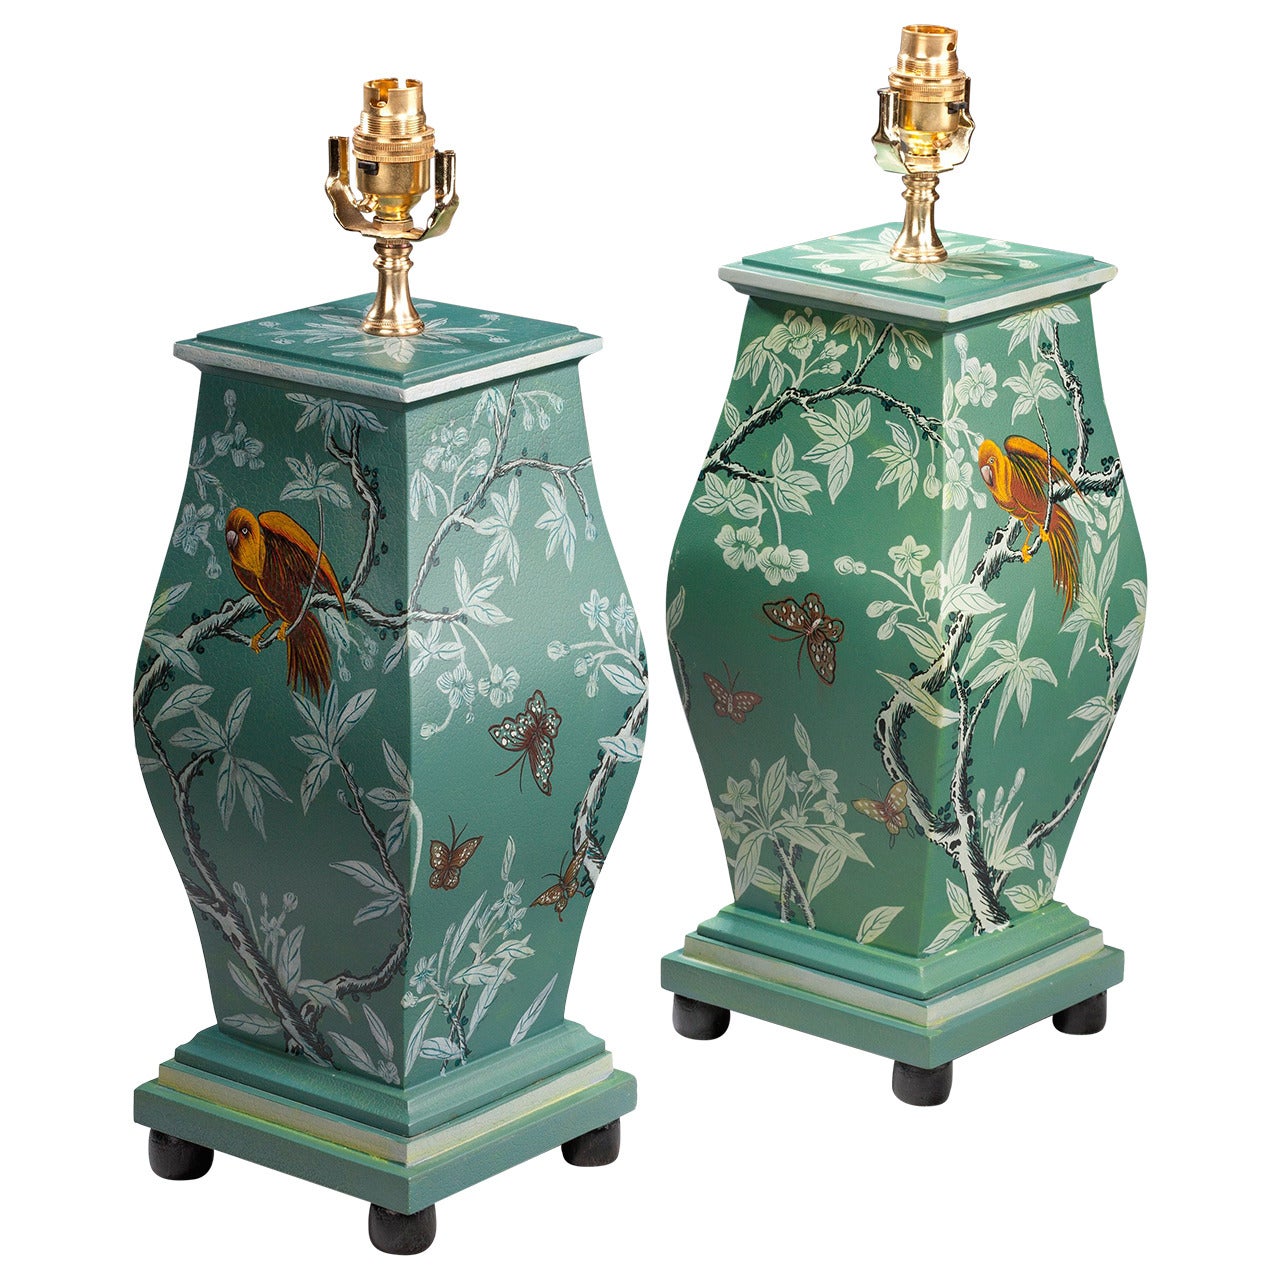 Pair of 20th century Square Section Lamps